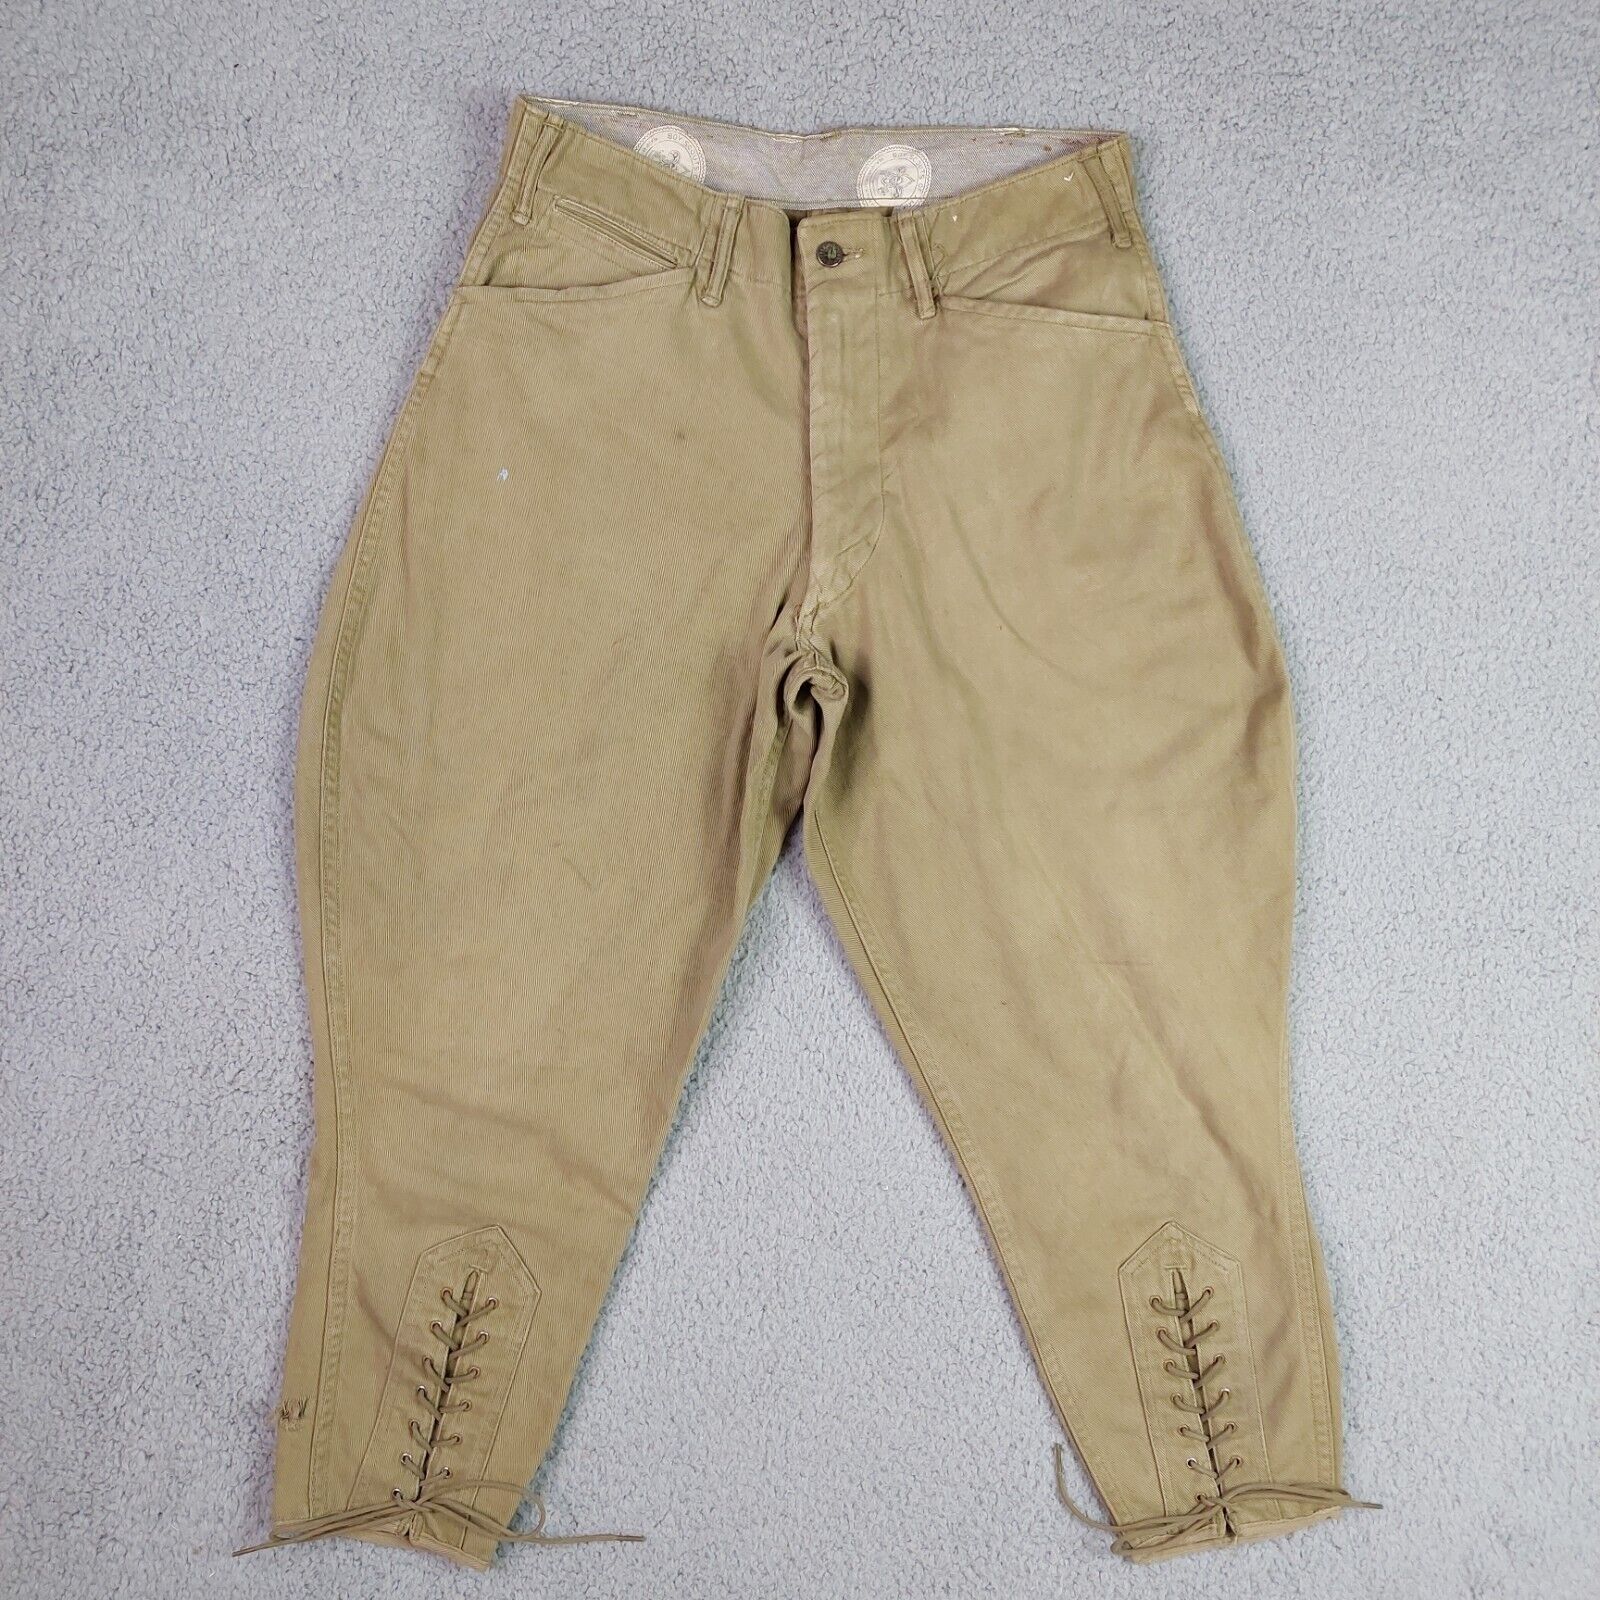 Vintage 1920s-1940s Boy Scouts of America Lace Up Pants Trousers Nickers Rare